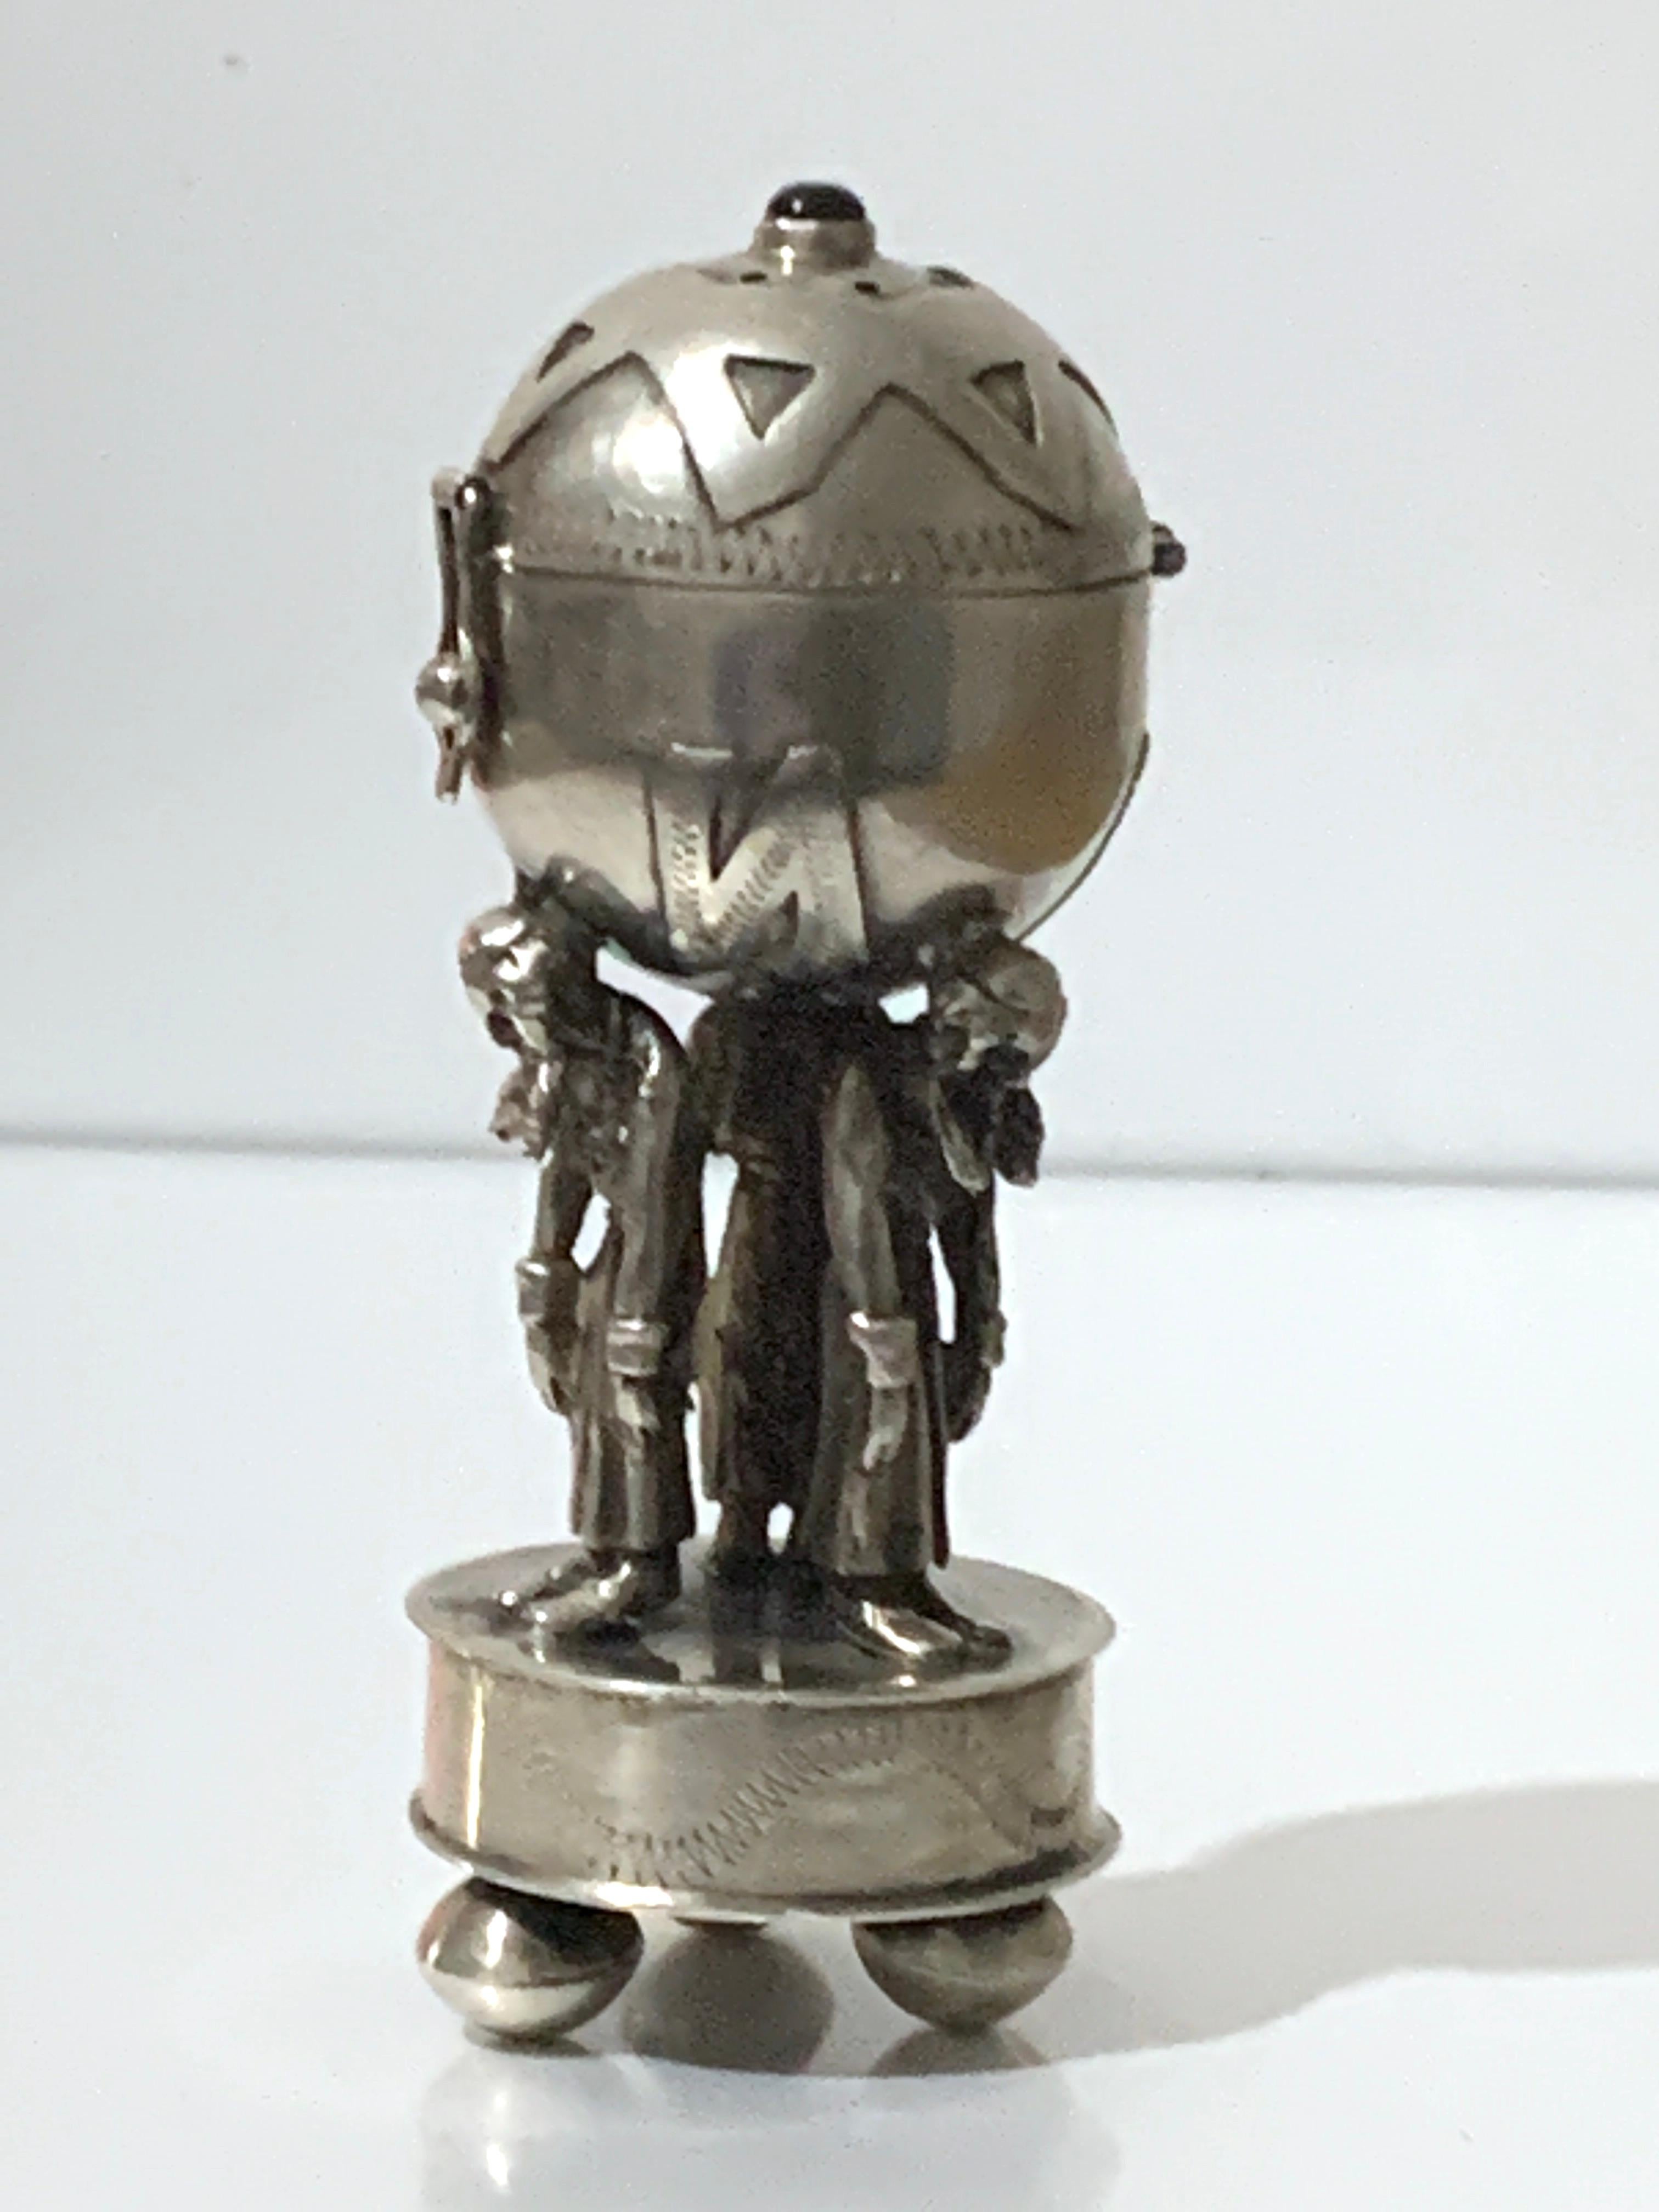 Russian Silversmith Designer 
Dated 1894
Anatoly Apollonovich Artsybashev novelty Silver item
In the form of three jesters holding a globe 
that opens and has pierced top to dispense a powder.
with a zig zag design throughout and topped by an onyx